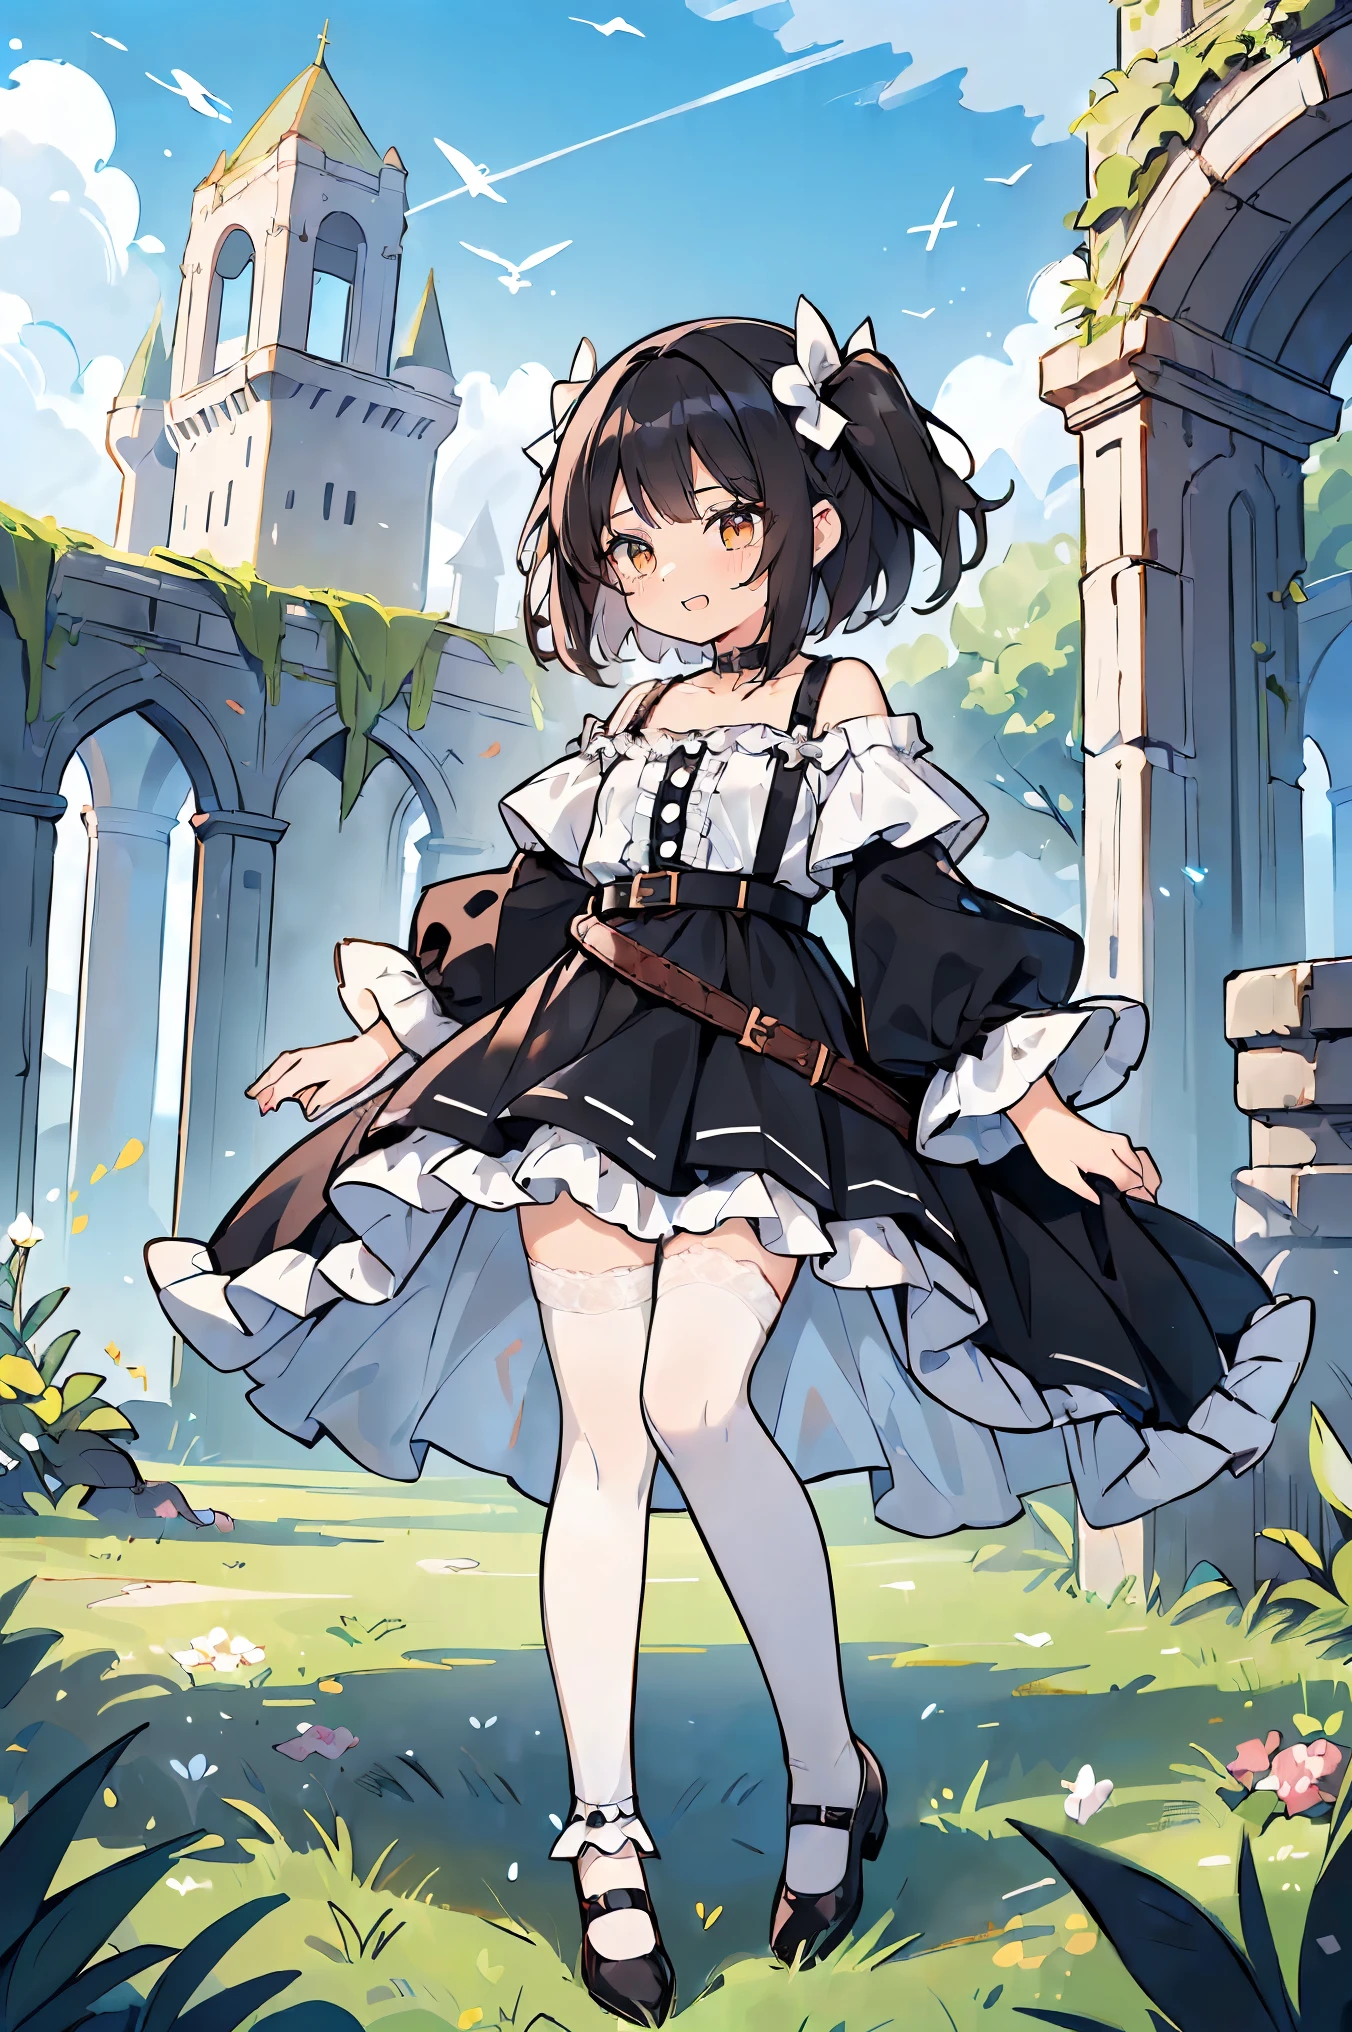 1 girl, solo, full body, standing, background with((fantasy world, ruins, fort, beautiful sky, shining sky, sunshine, castle:1.55)), girl with(((medium hair, long hair, one side up:1.55), (perfect hands, five fingers:1.55), (camisoles, suspenders, belt, blue clothes, cross, choker, collarbone, dress, wind blowing dress, lace dress, frills camisoles, off-shoulder sleeves, half-sleeves, black pumps, black footwear:1.55), ((white legwear, single legwear:1.55)))